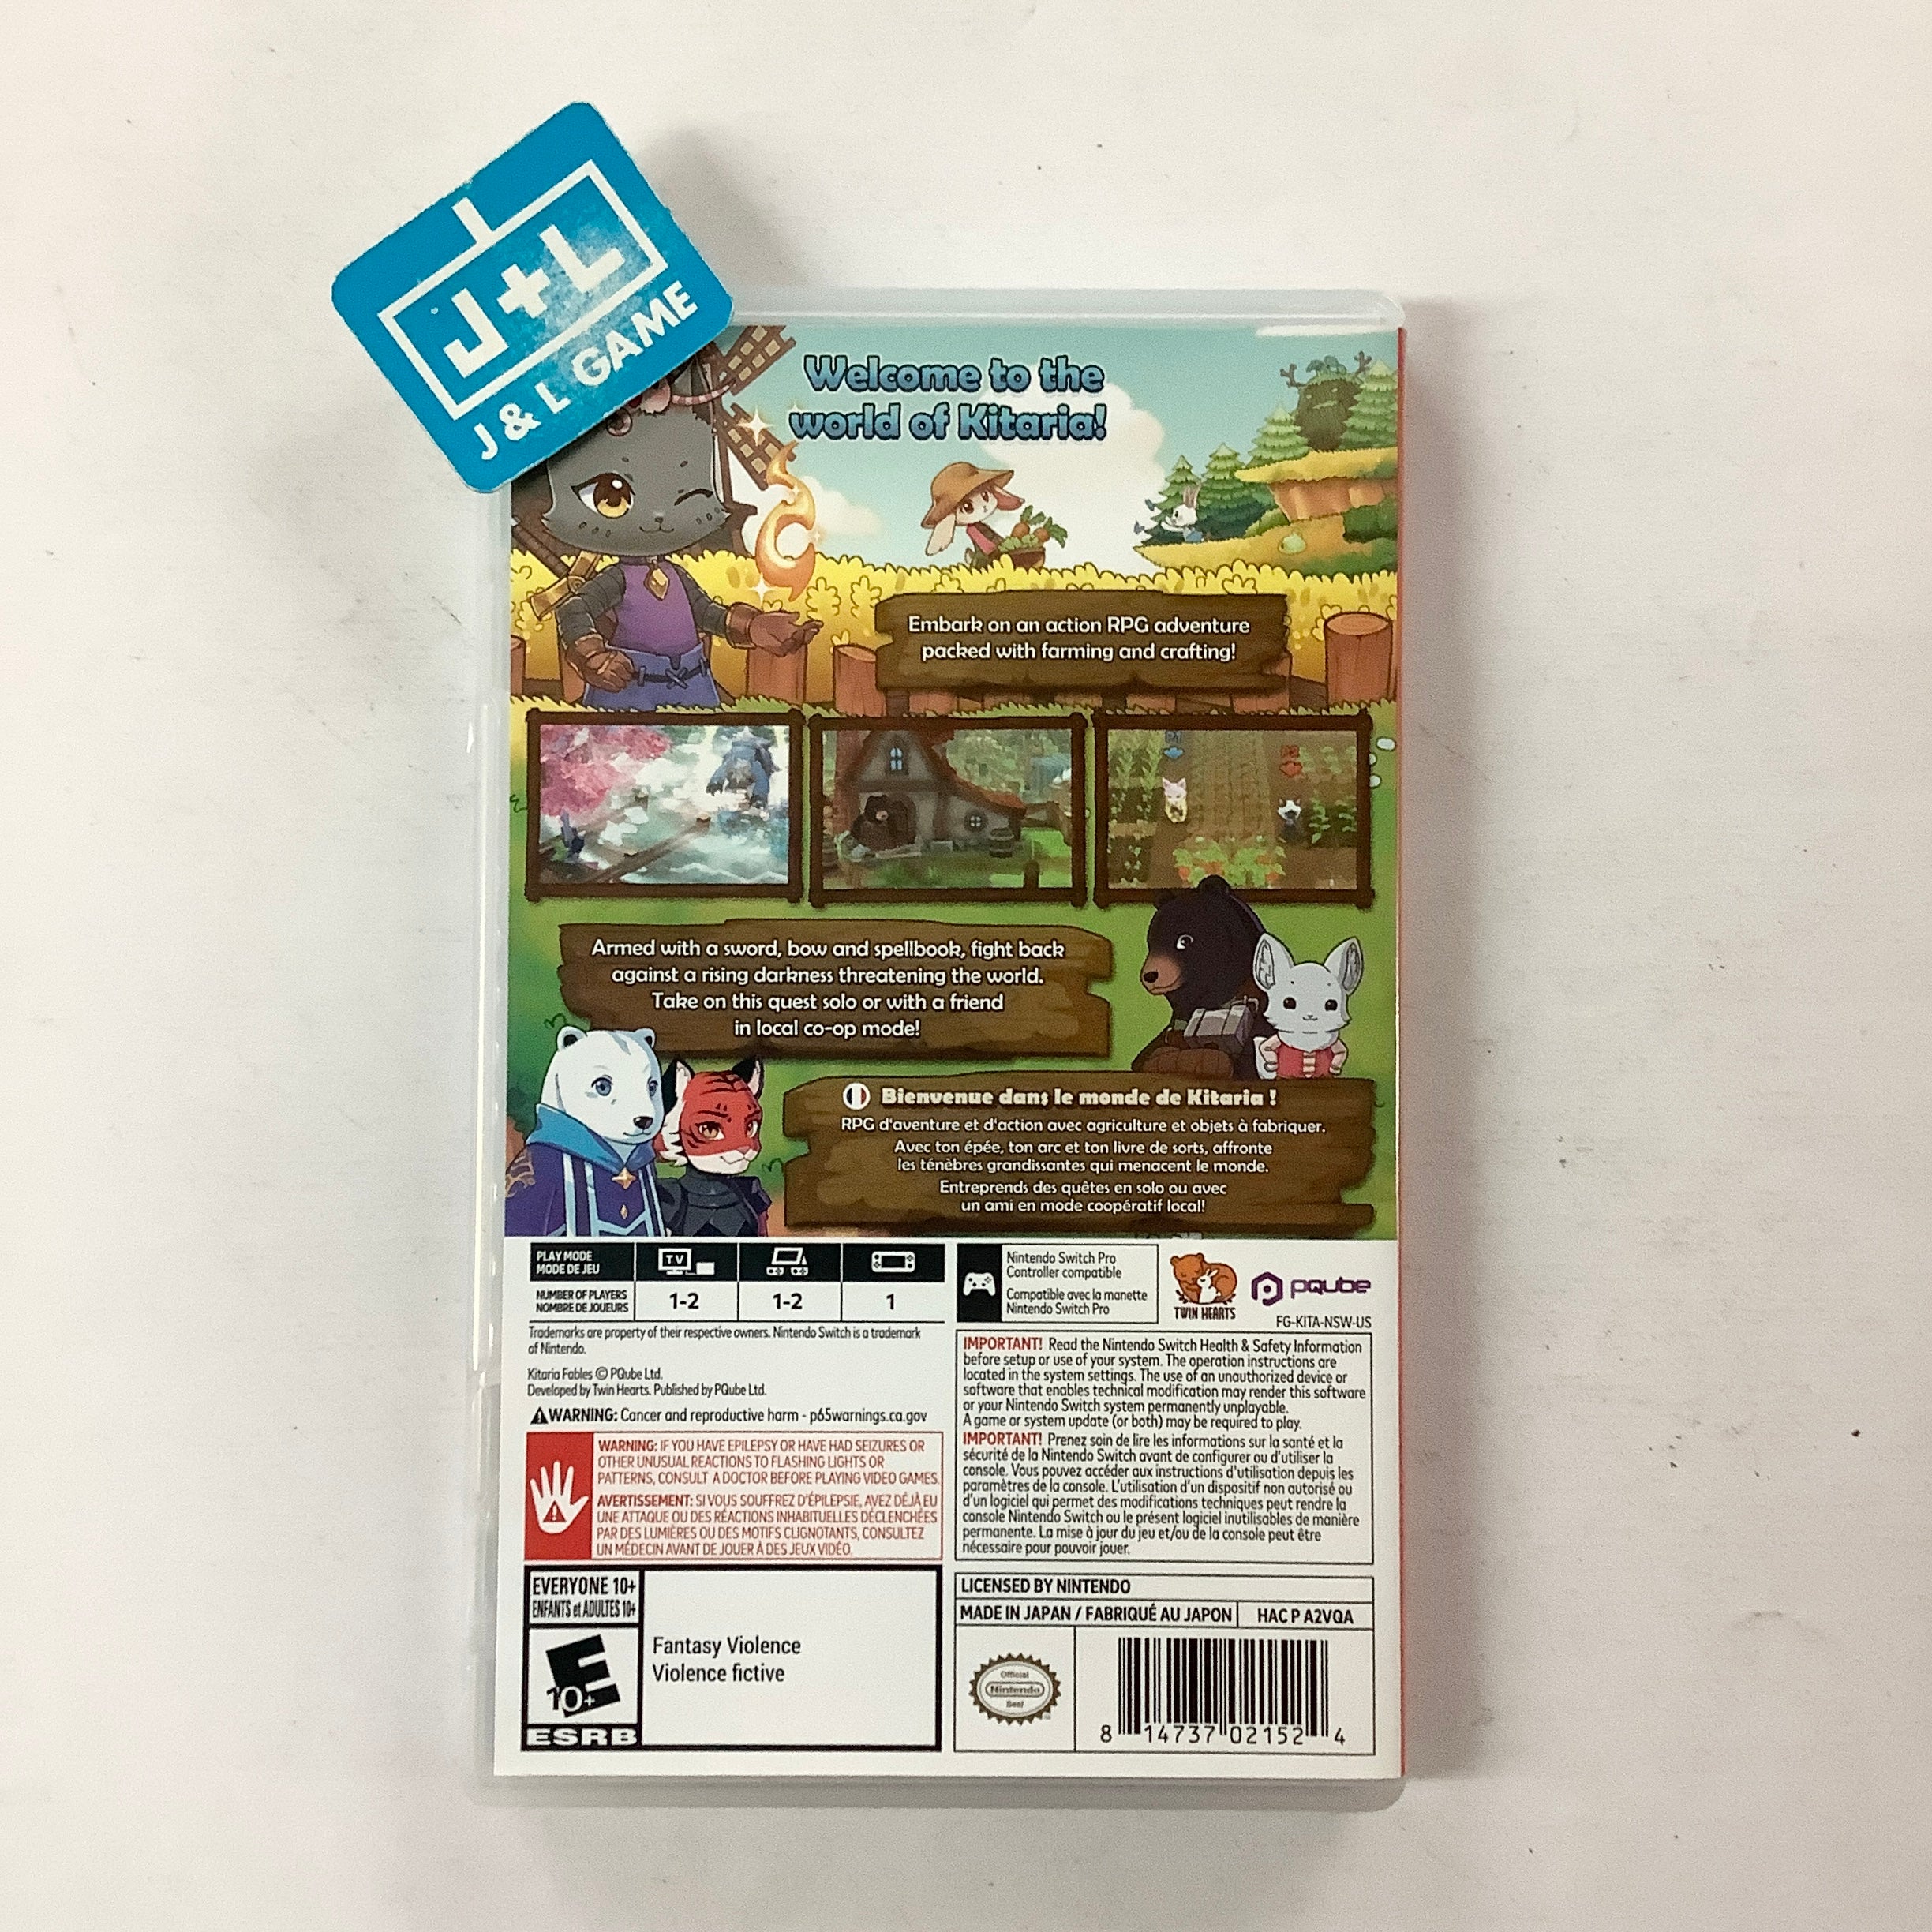 Kitaria Fables - (NSW) Nintendo Switch [UNBOXING] Video Games GS2 Games   